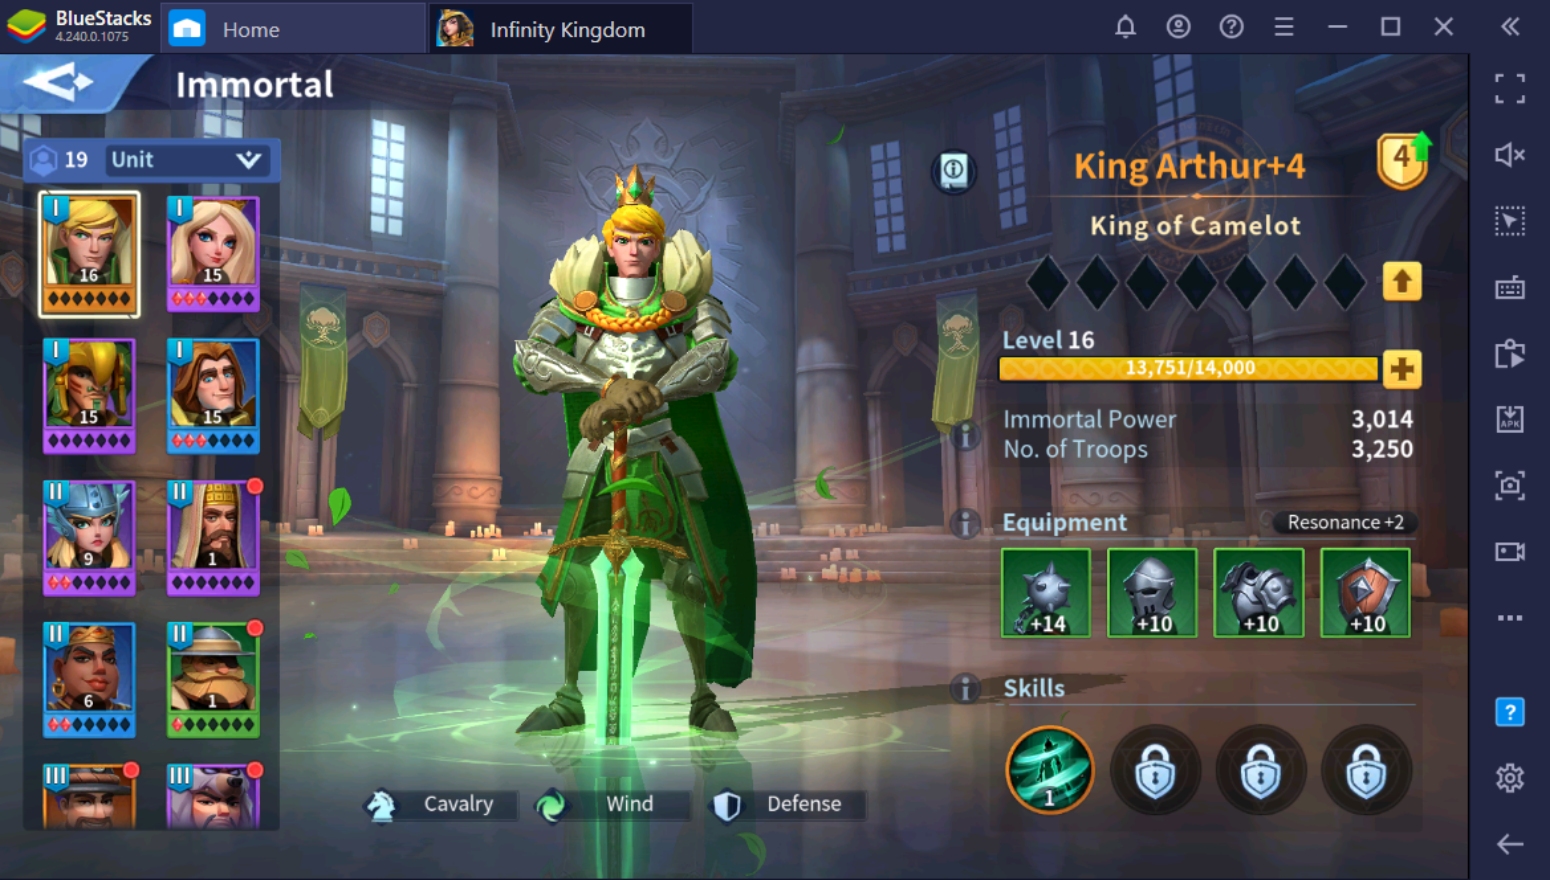 Raising The Strongest Army In Infinity Kingdom On PC